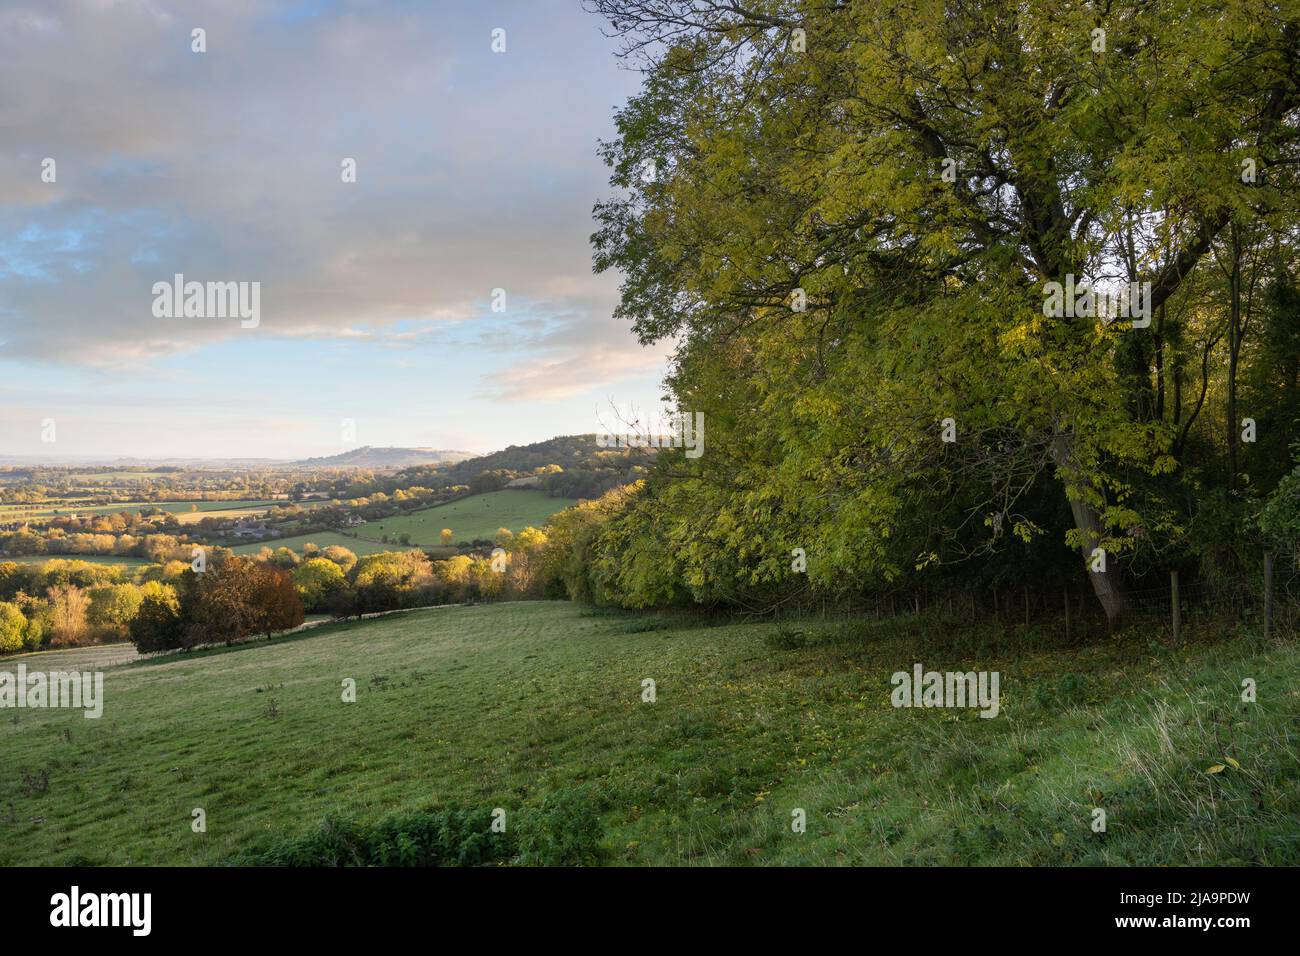 Campagna del Cotswold del nord, Gloucestershire, Inghilterra. Foto Stock